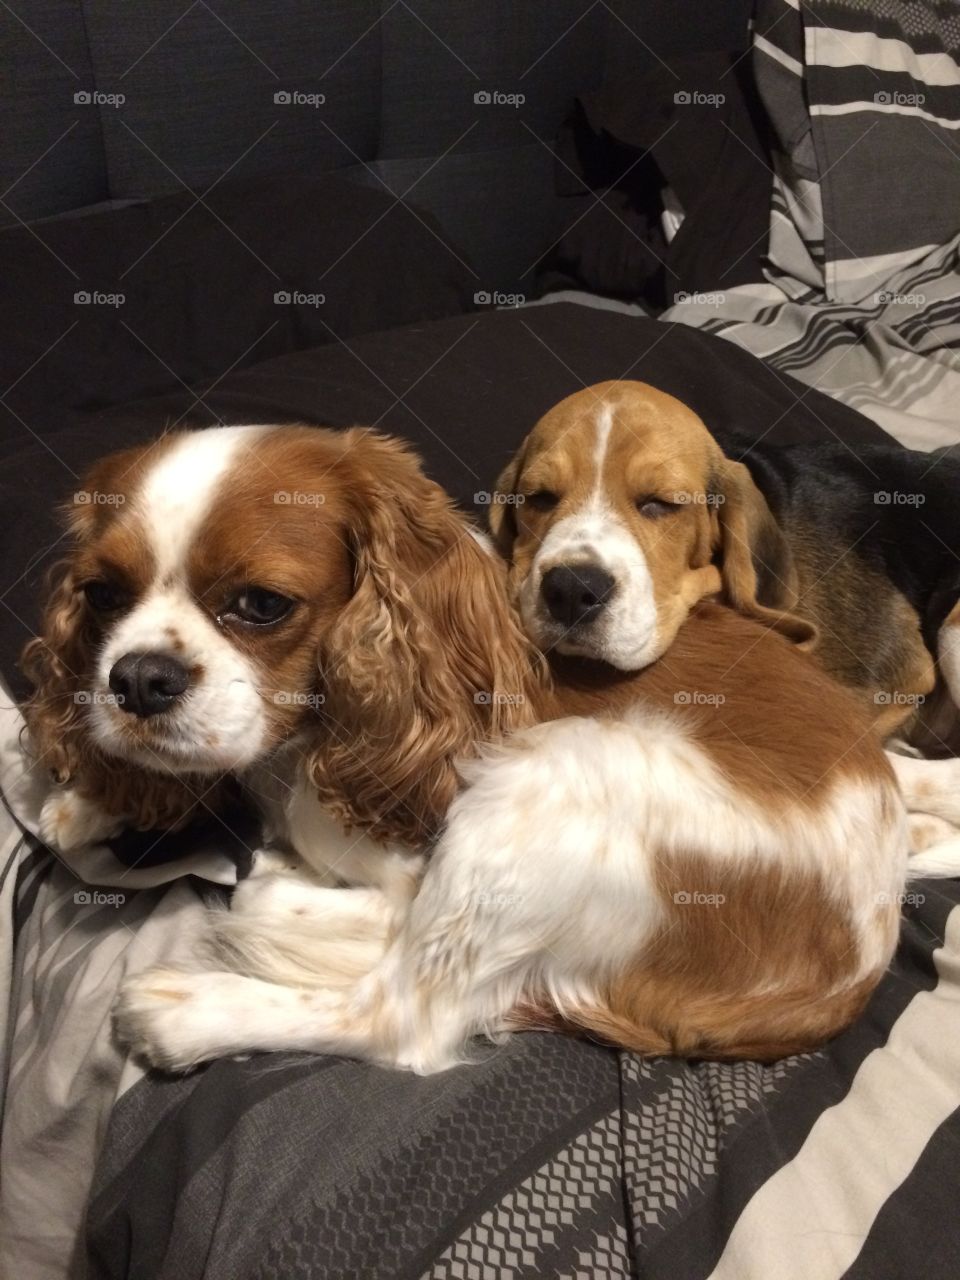 Sleeping dogs. Chevalier King Charles and beagle puppy 